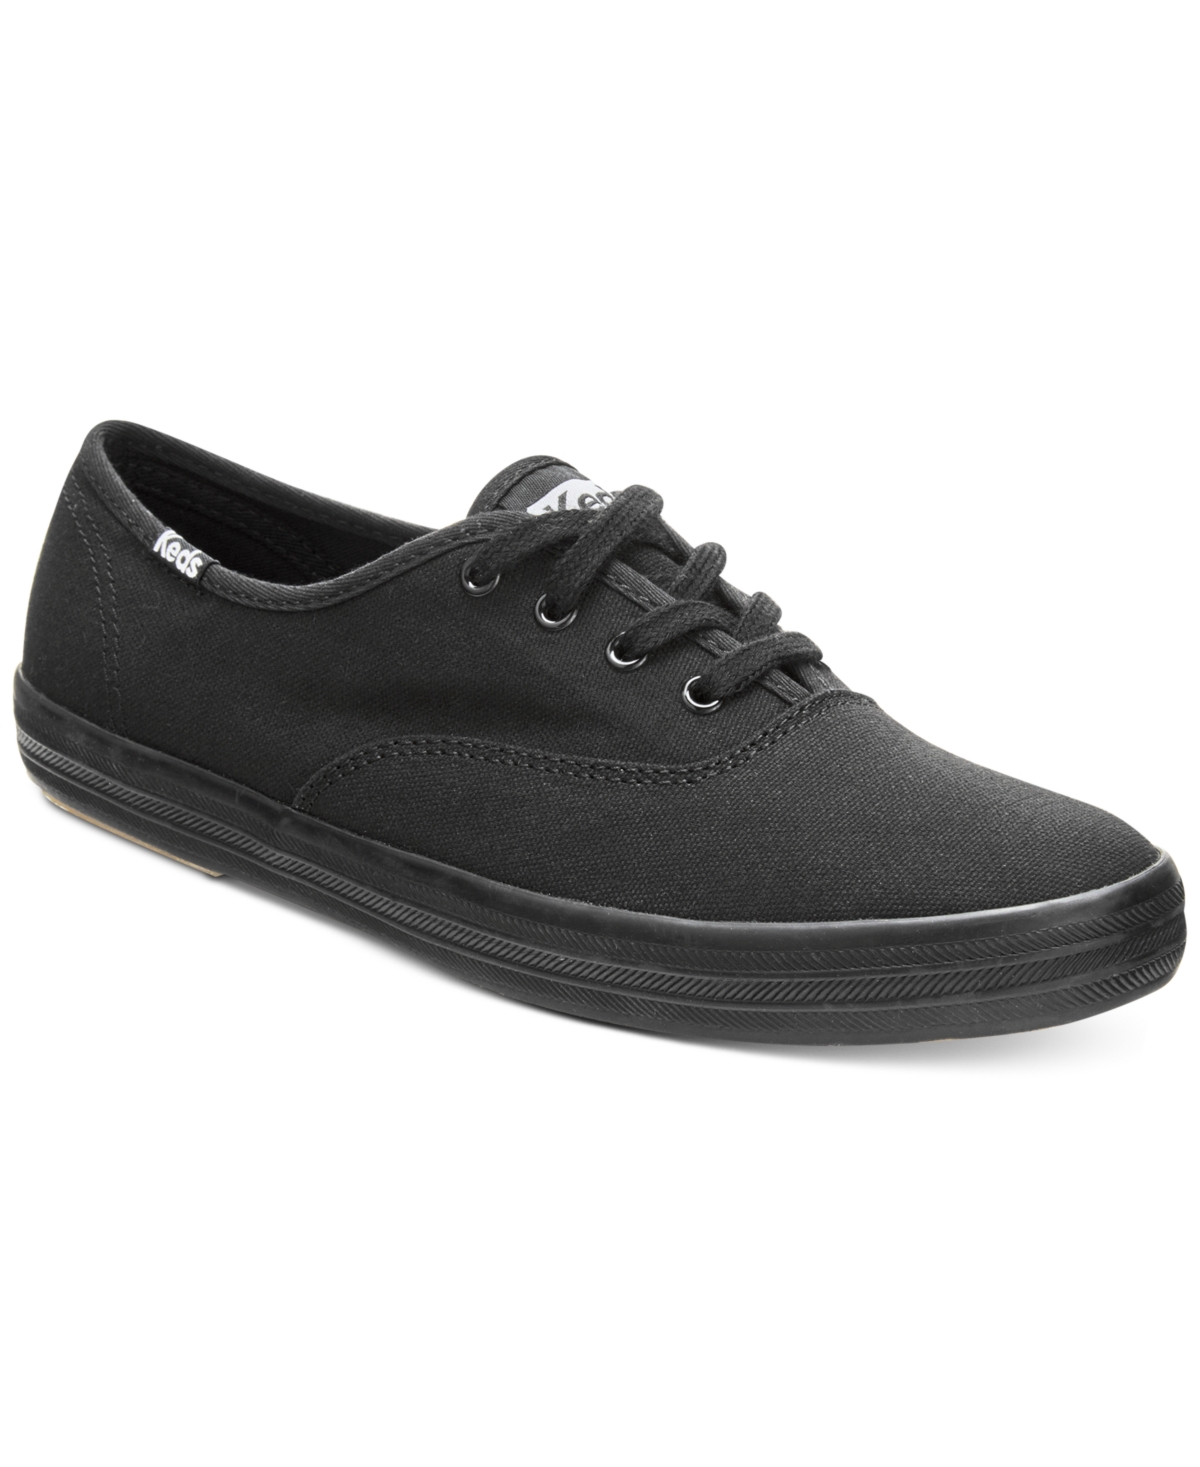 UPC 044208122799 product image for Keds Women's Champion Ortholite Lace-Up Oxford Fashion Sneakers | upcitemdb.com